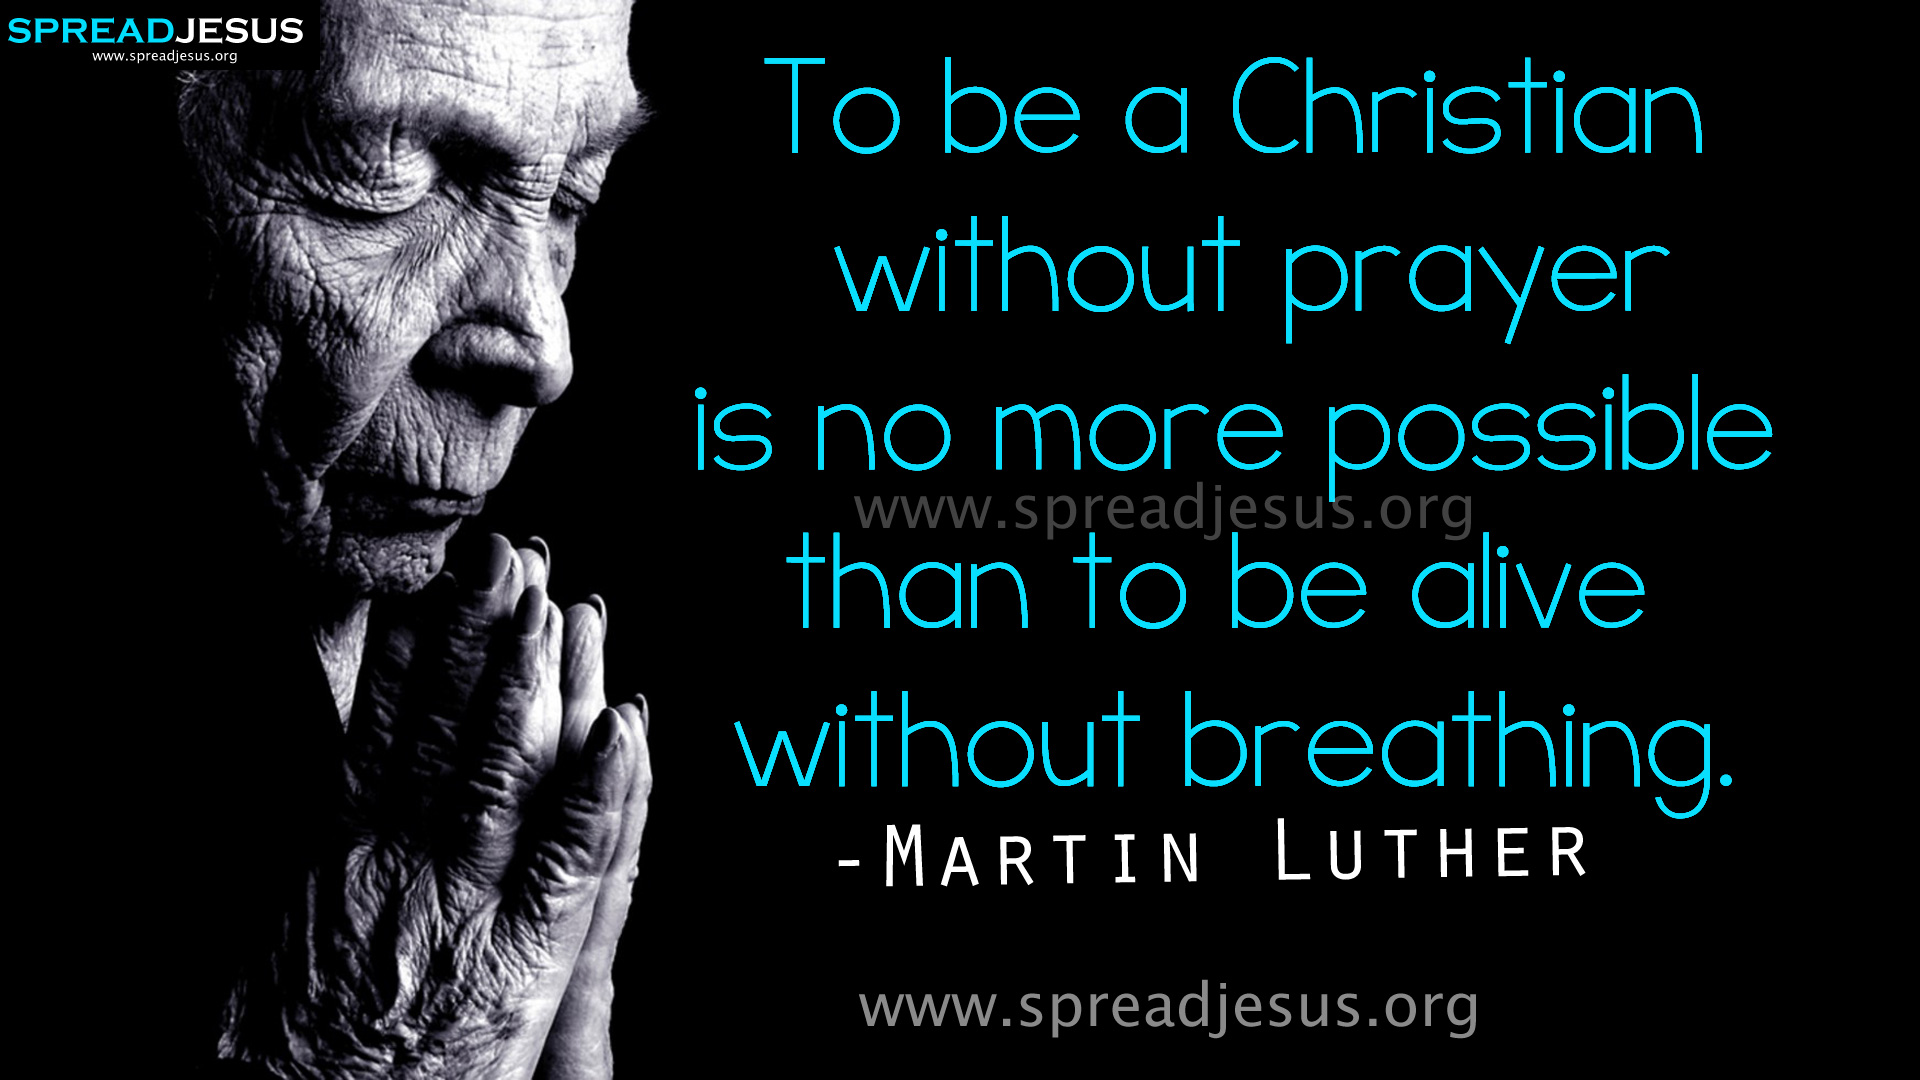 Quotes By Famous Christians About Prayer Quotesgram